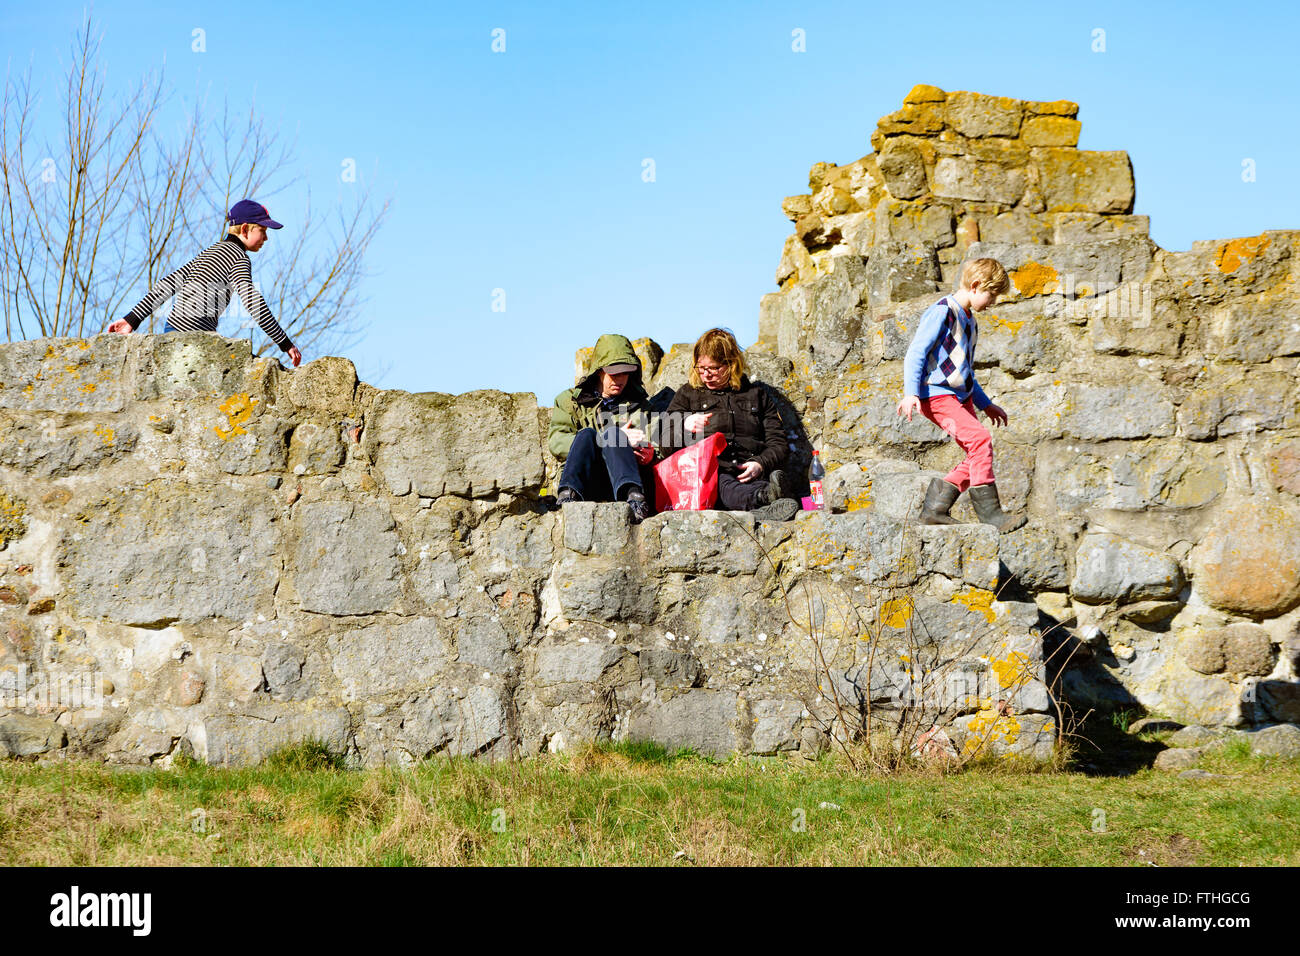 Ahus, Sweden - March 20, 2016: Young people resting and having fun at a stone ruin. Two adults sit and talk while two kids run a Stock Photo